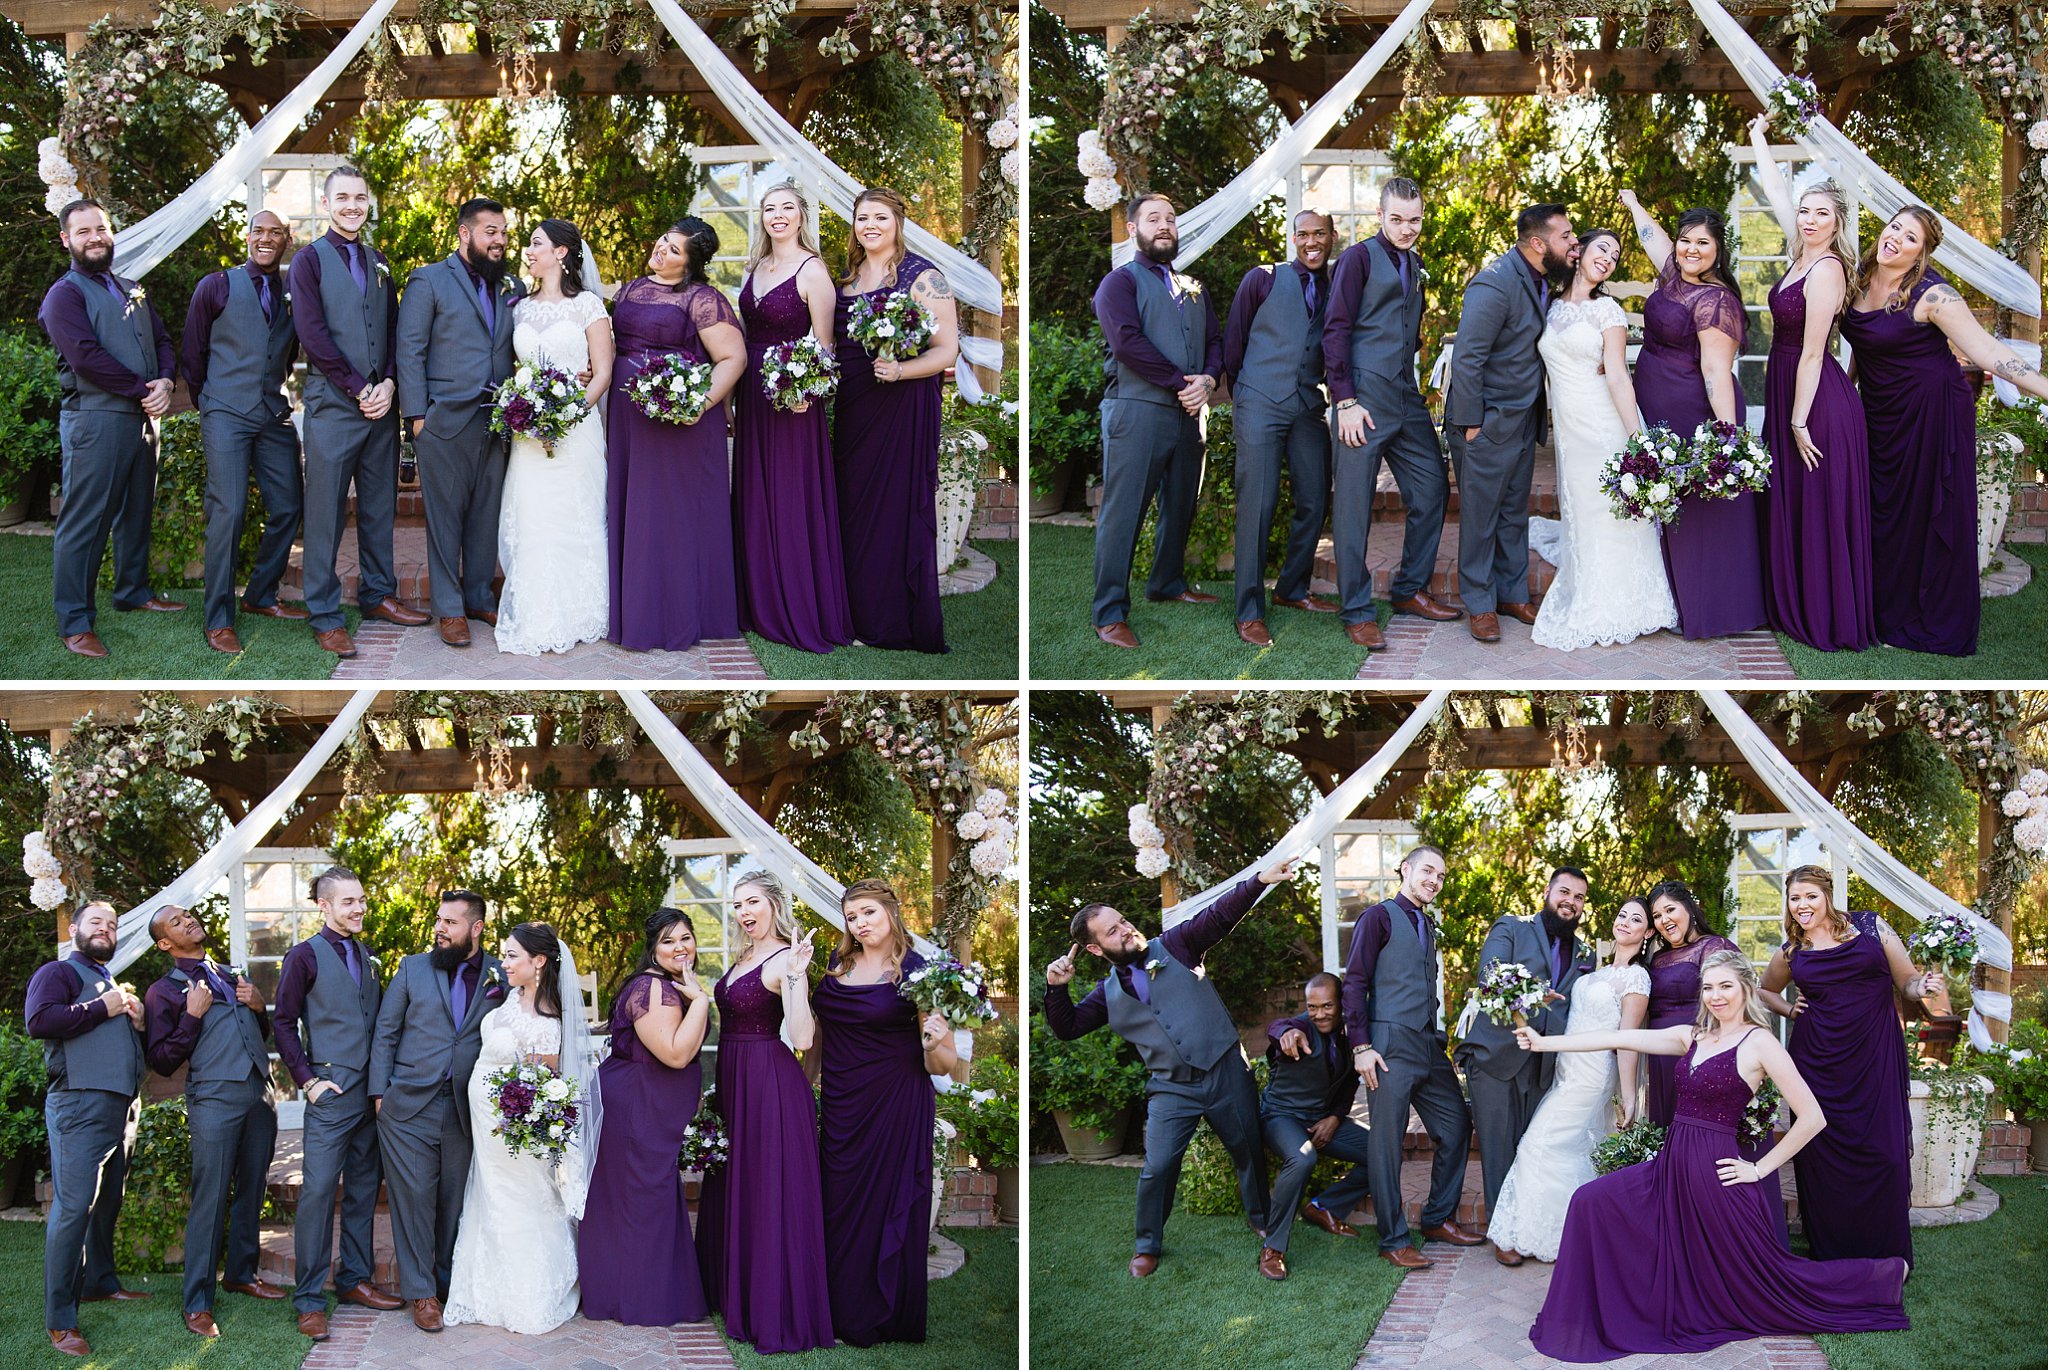 Photobooth style purple and grey bridal party photos